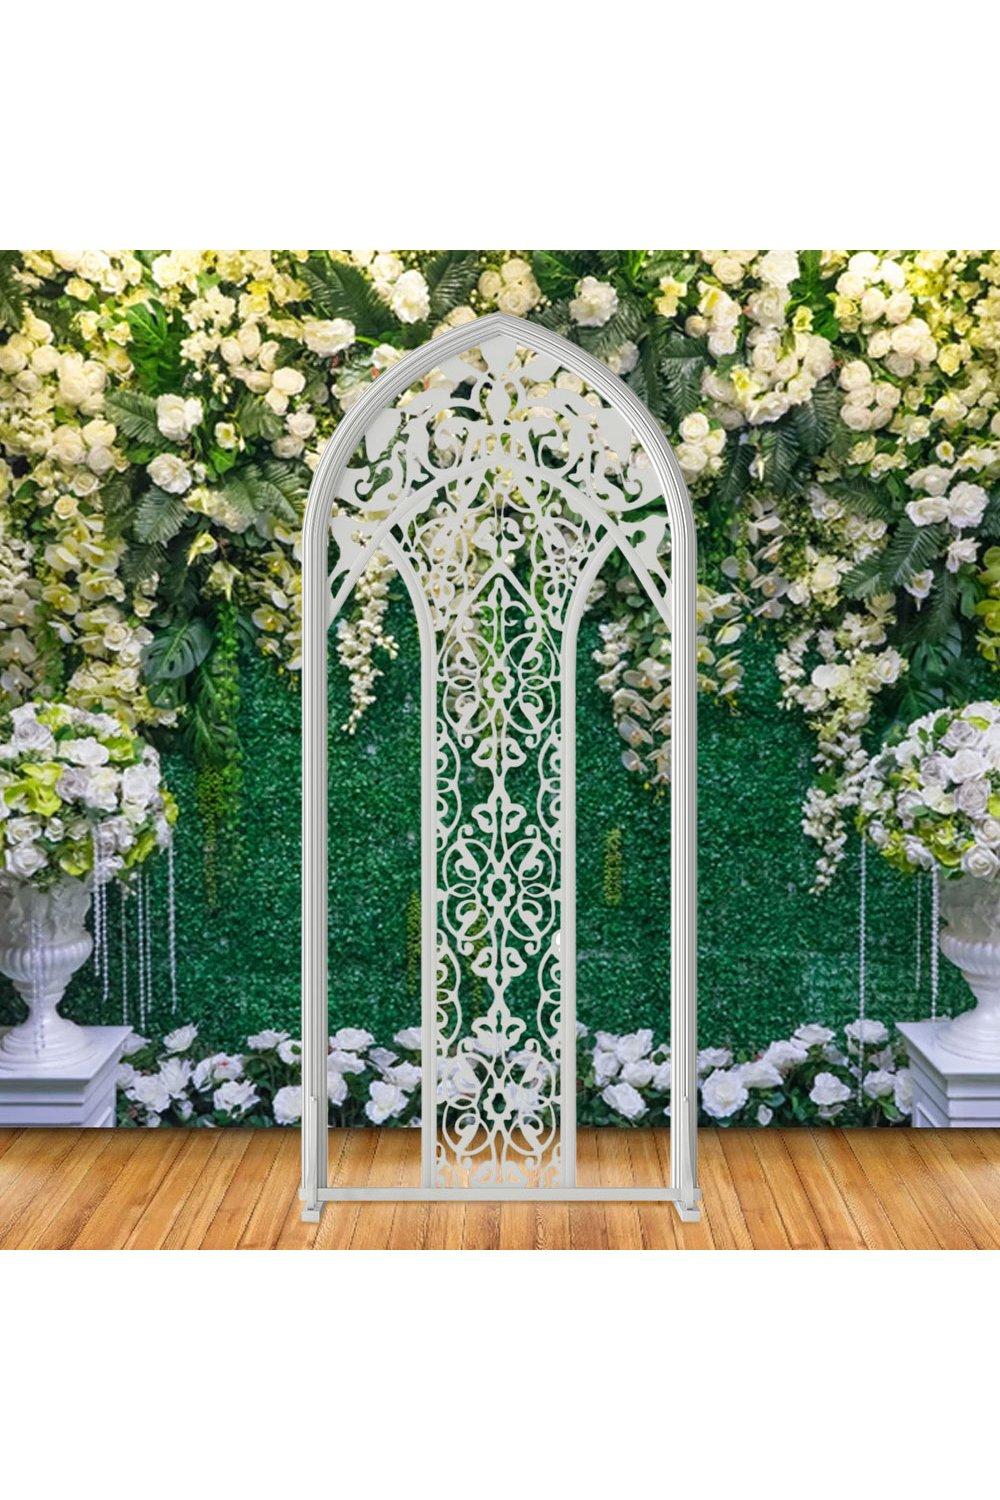 Metal Wedding Arch Backdrop Screen Flower Stand